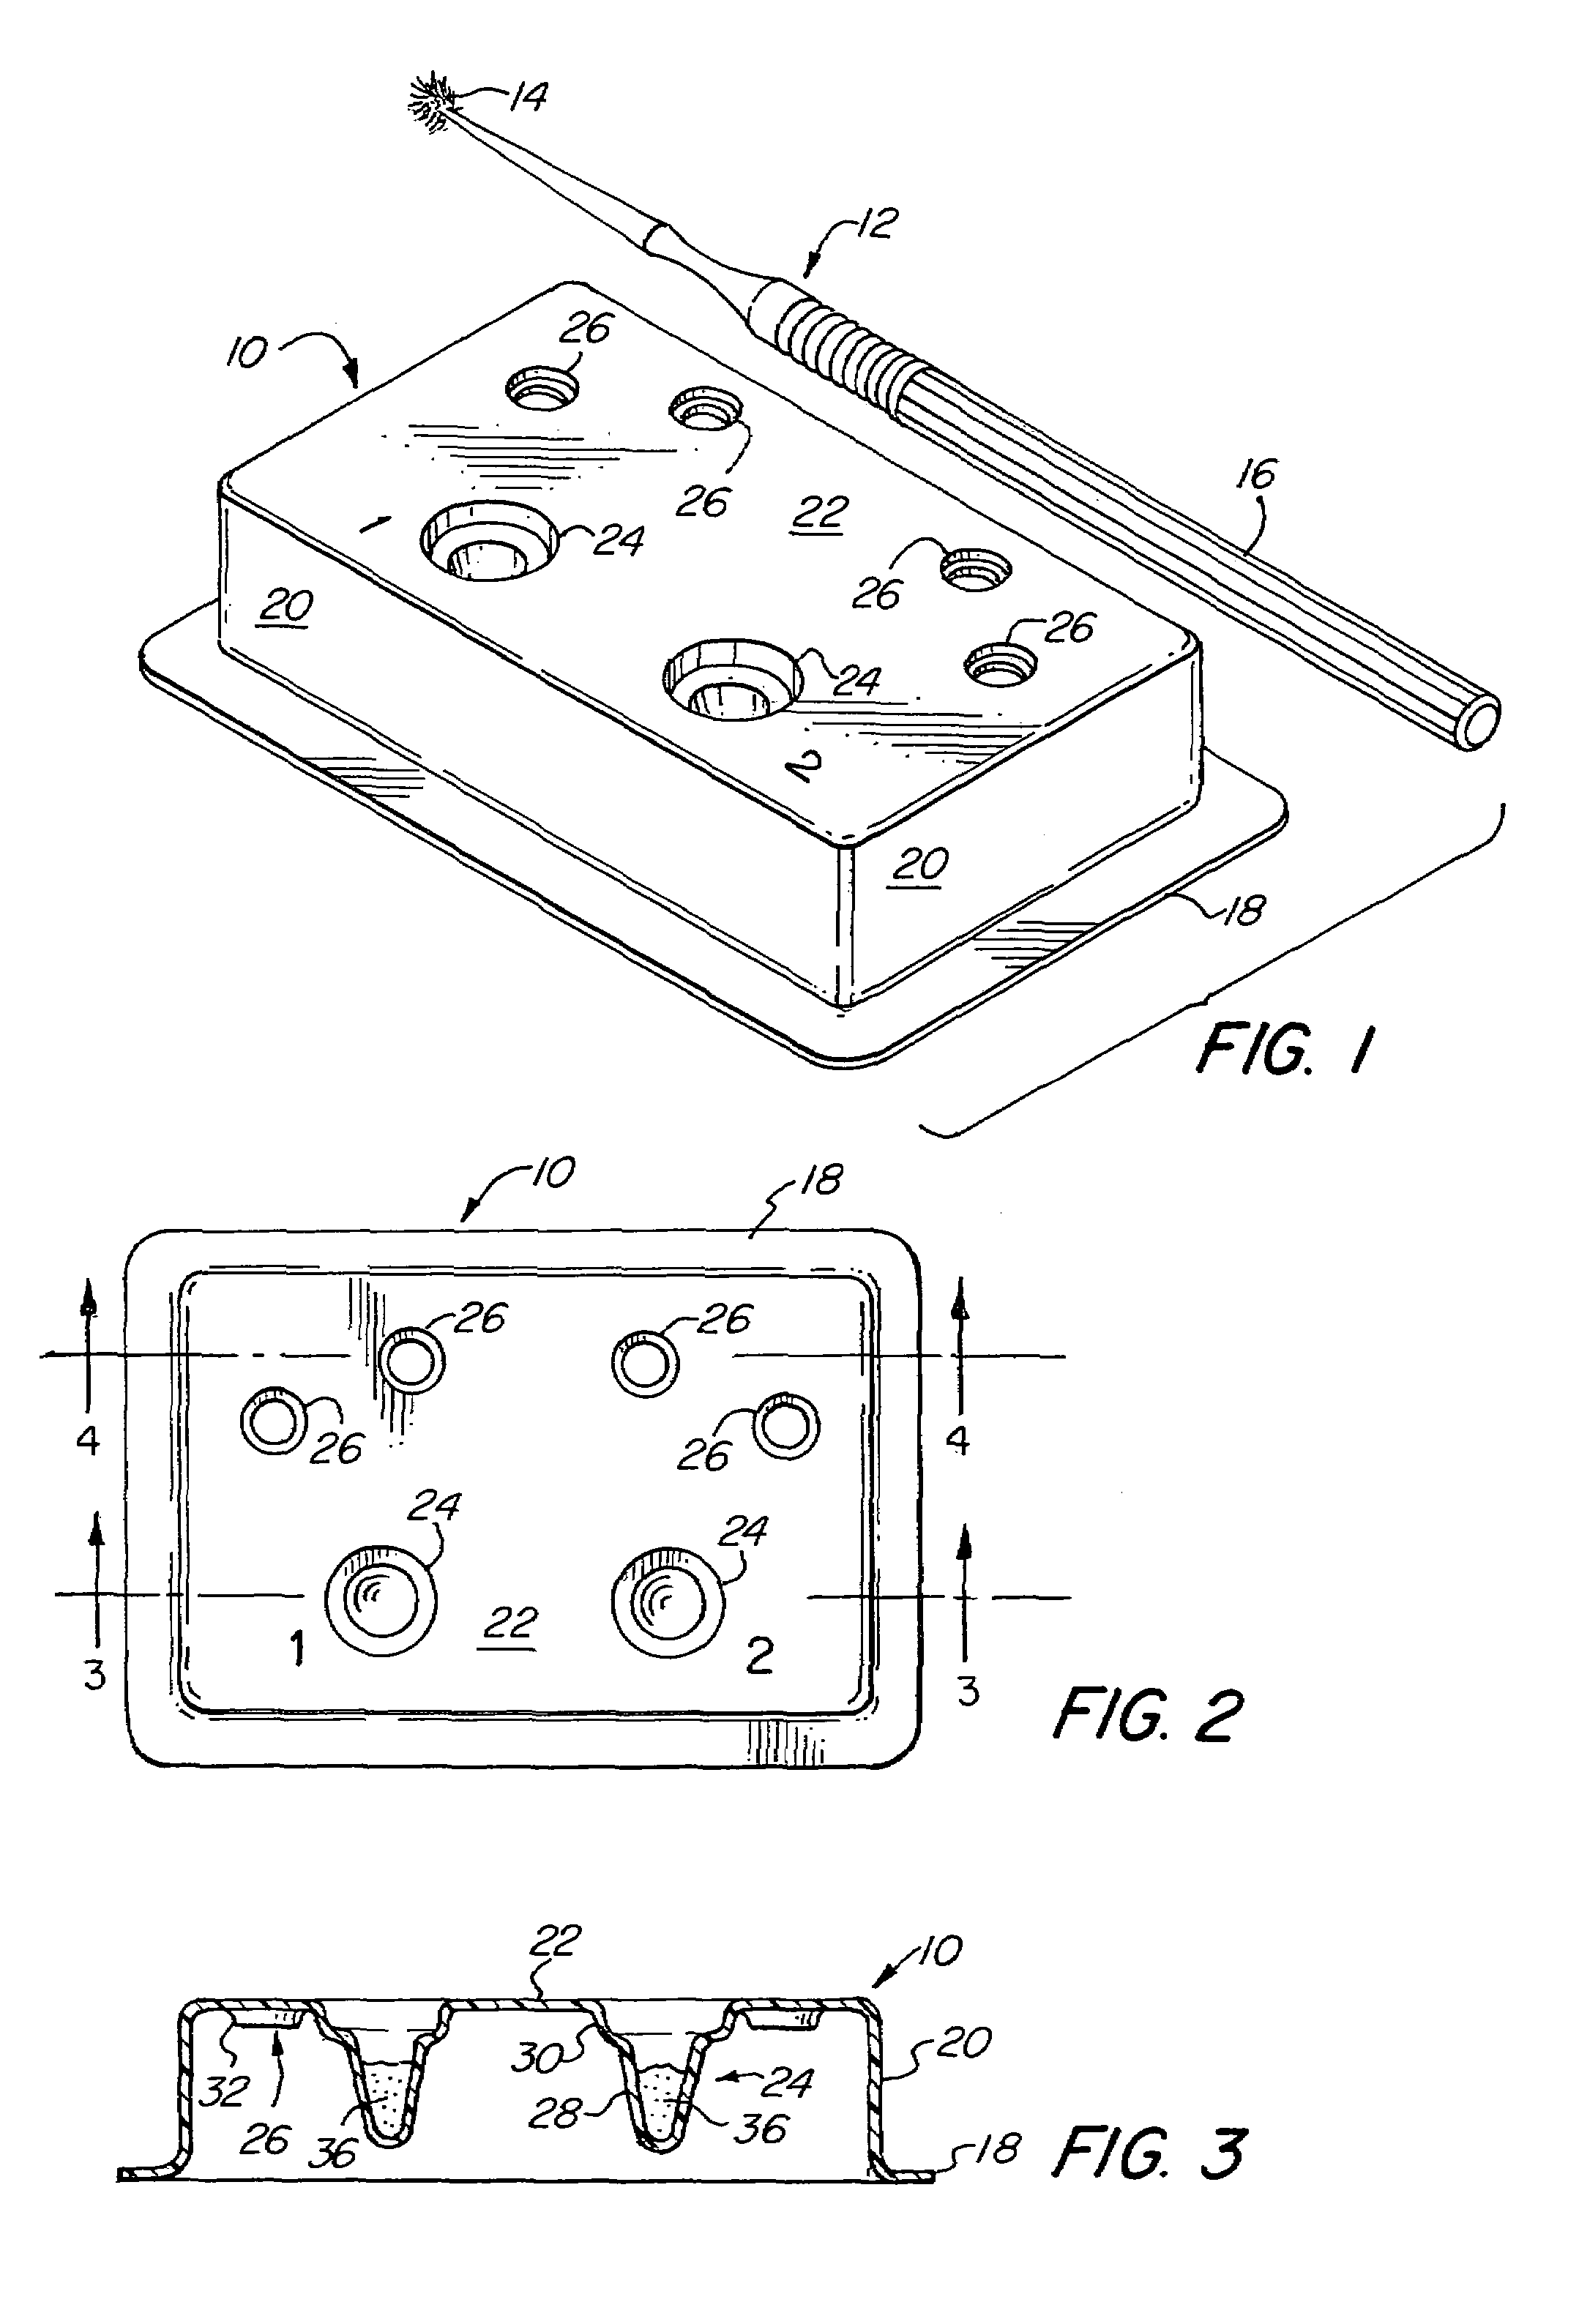 Dental applicator holding and material dispensing tray